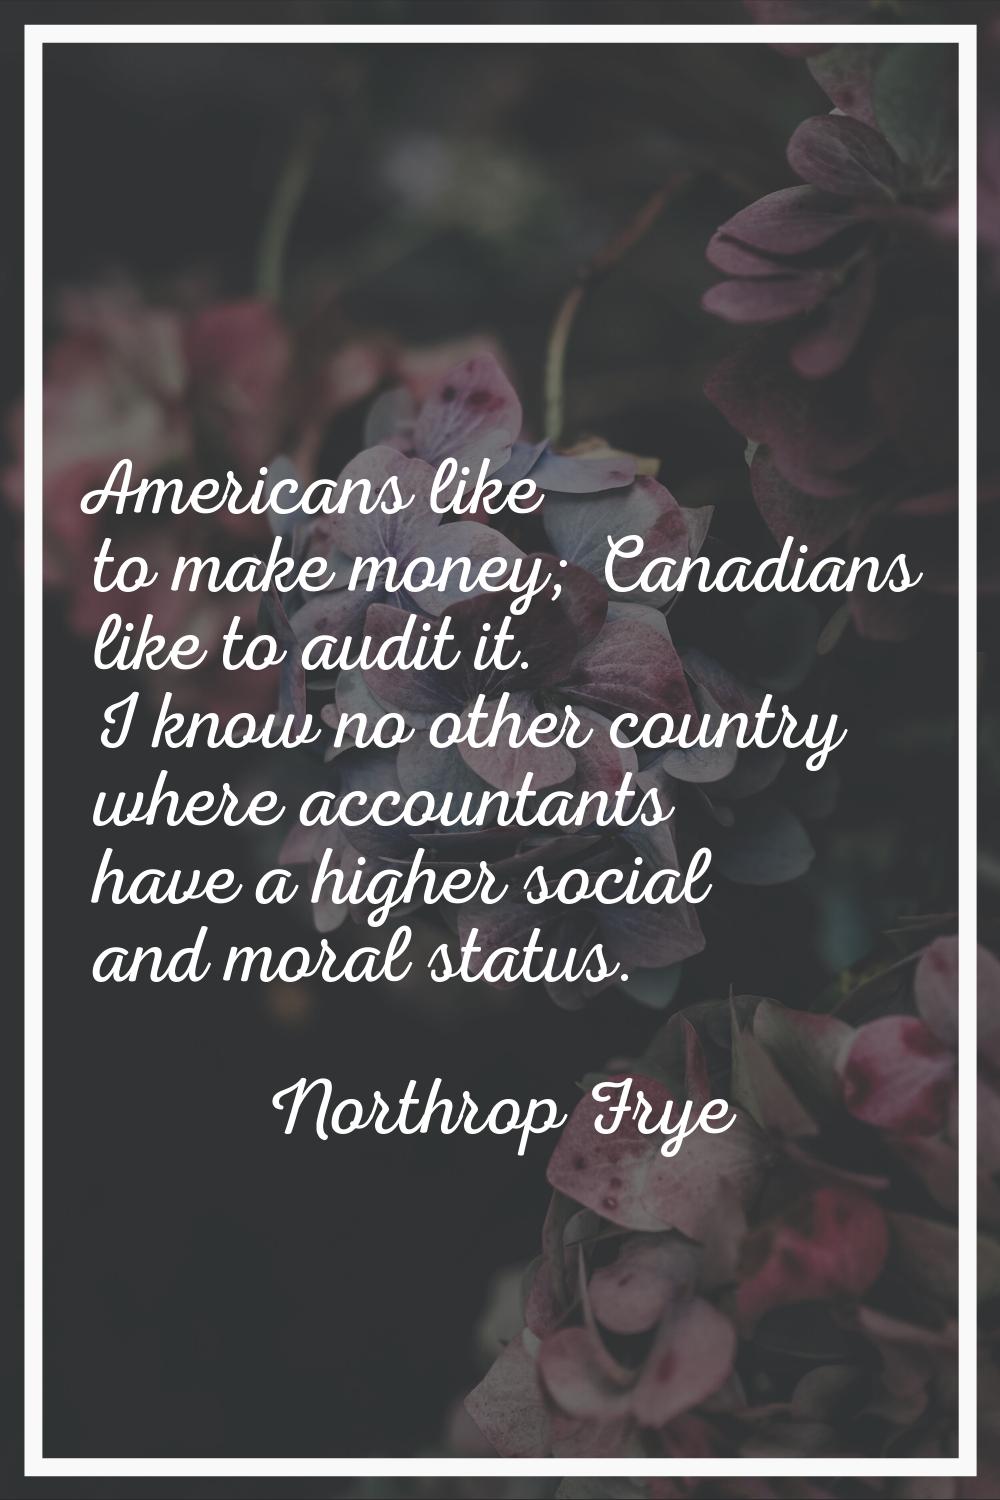 Americans like to make money; Canadians like to audit it. I know no other country where accountants